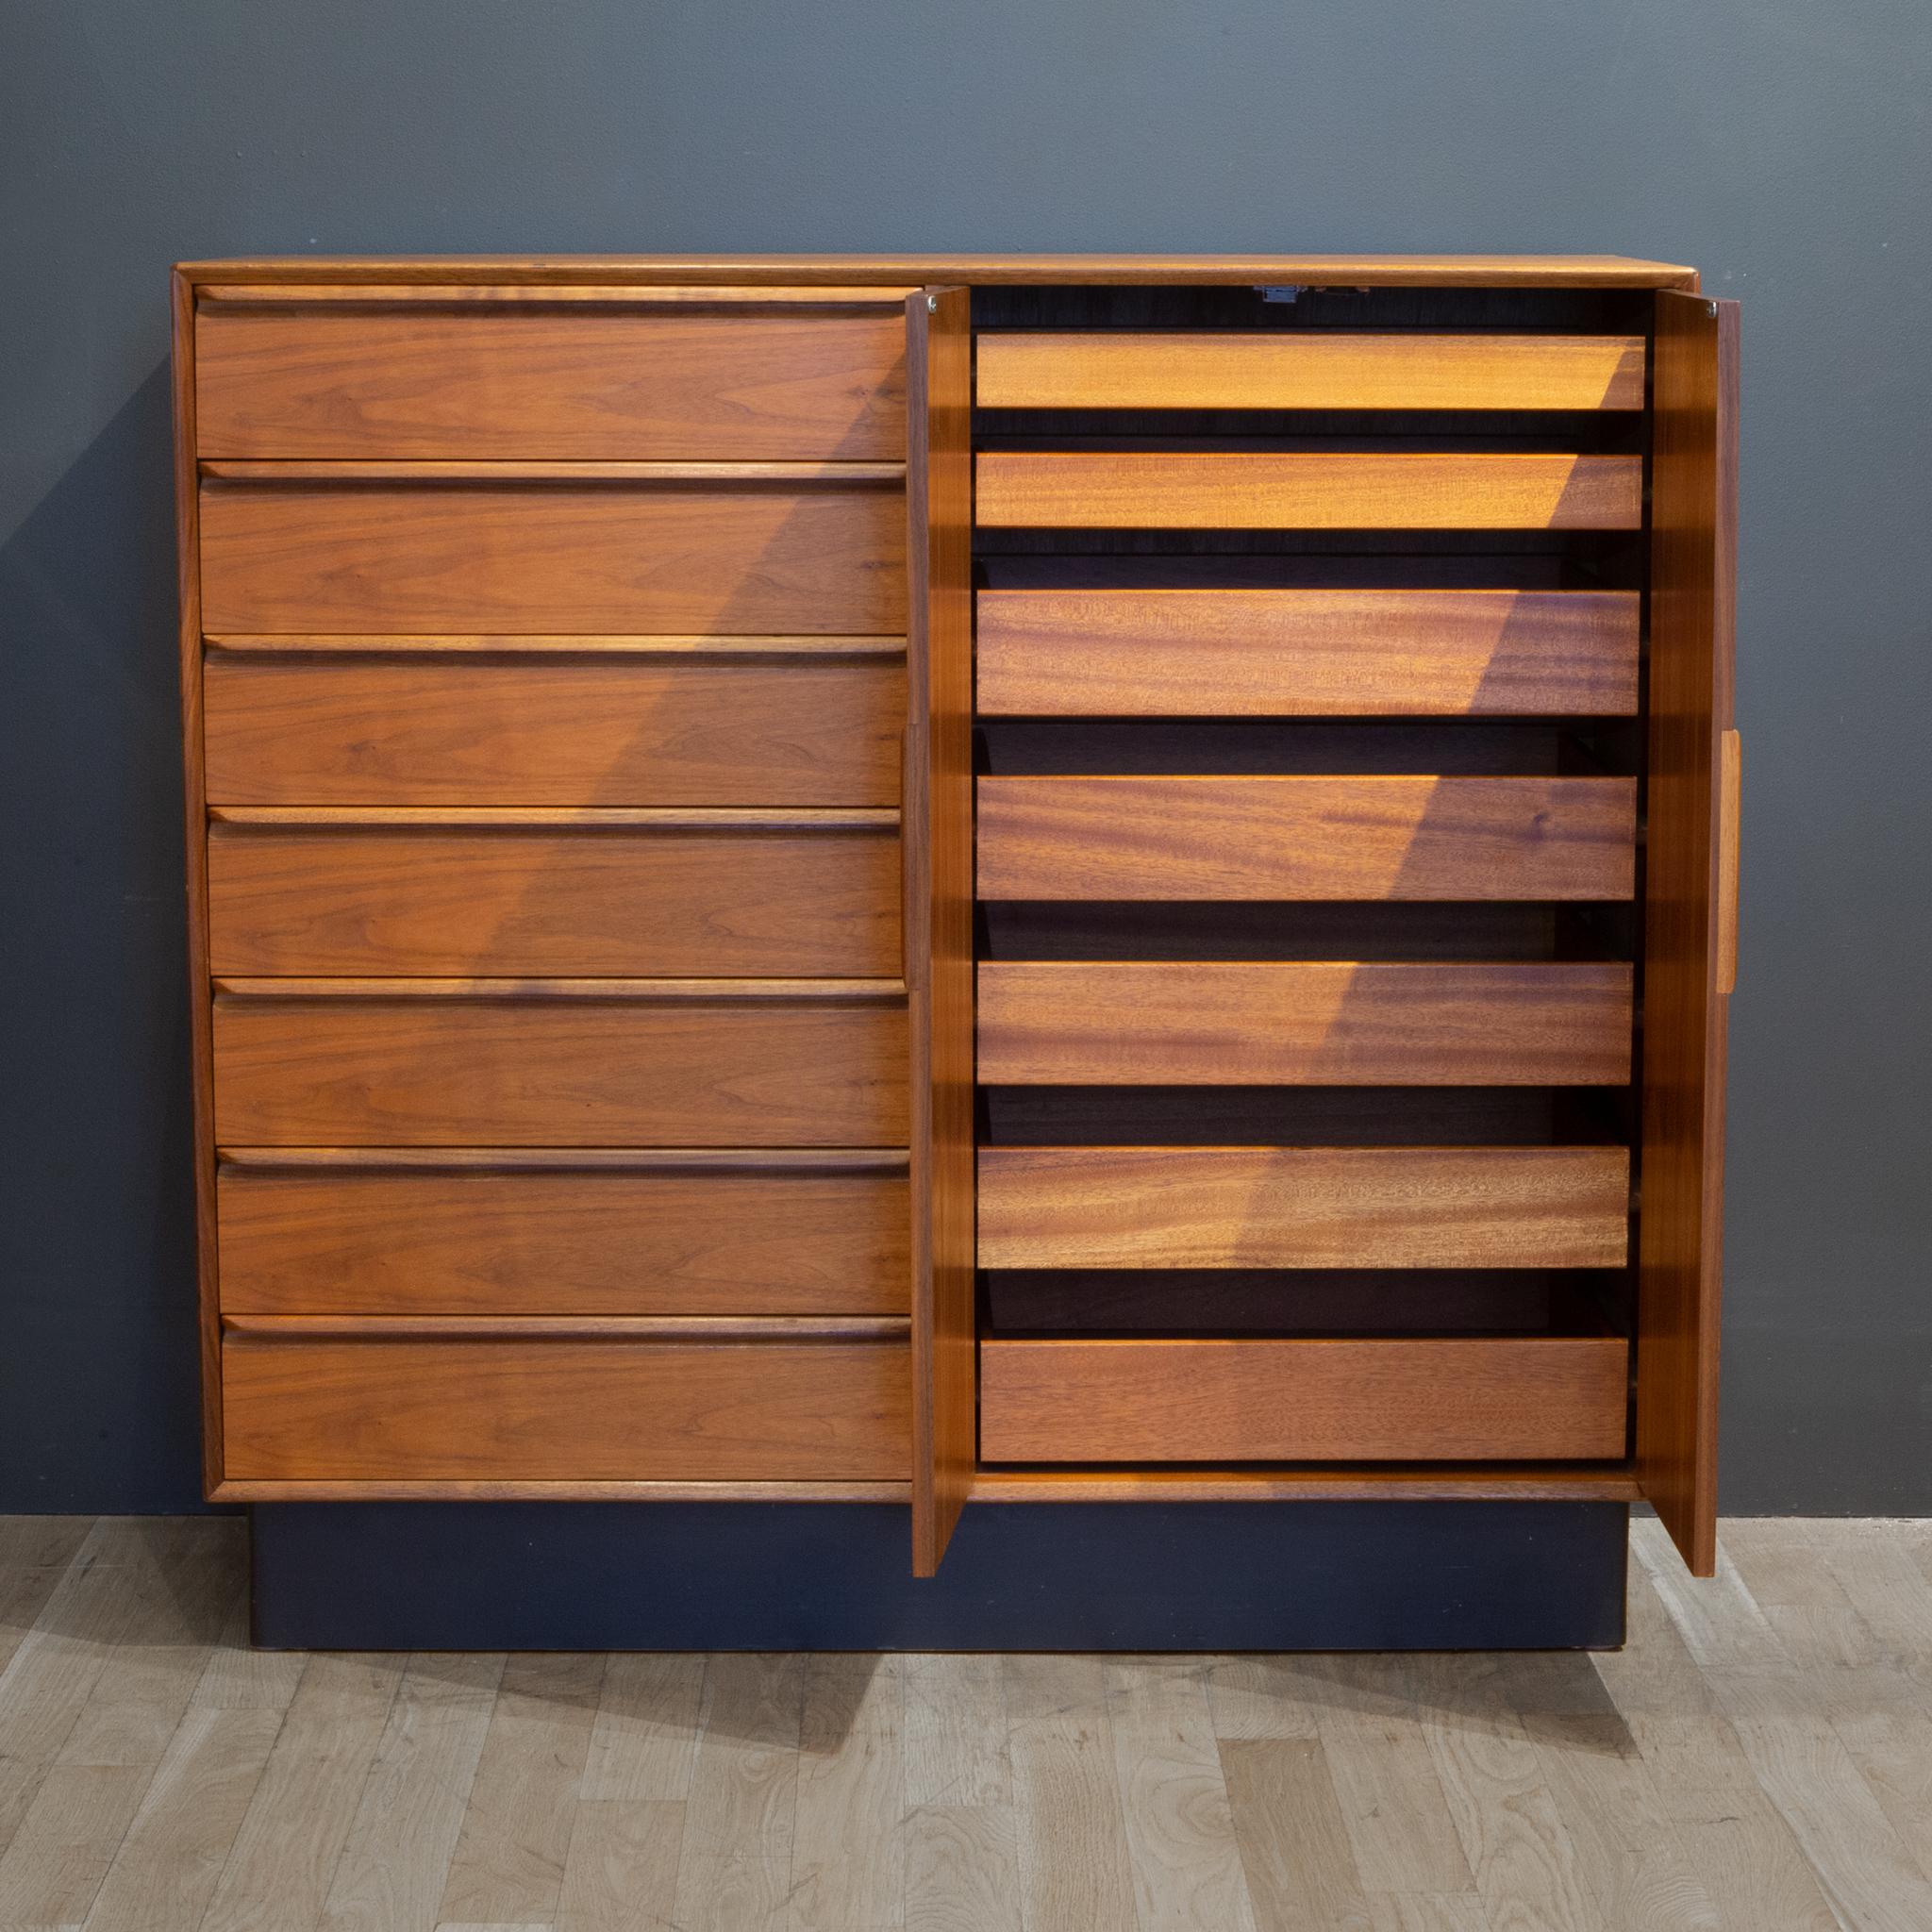 About

A Mahogany and Teak gentleman's chest by Westnofa, Norway. This statement chest has rich wood grain throughout the entire piece, sharply, curved drawer pulls and dovetail joints. A rare piece with fourteen drawers rather than adjustable